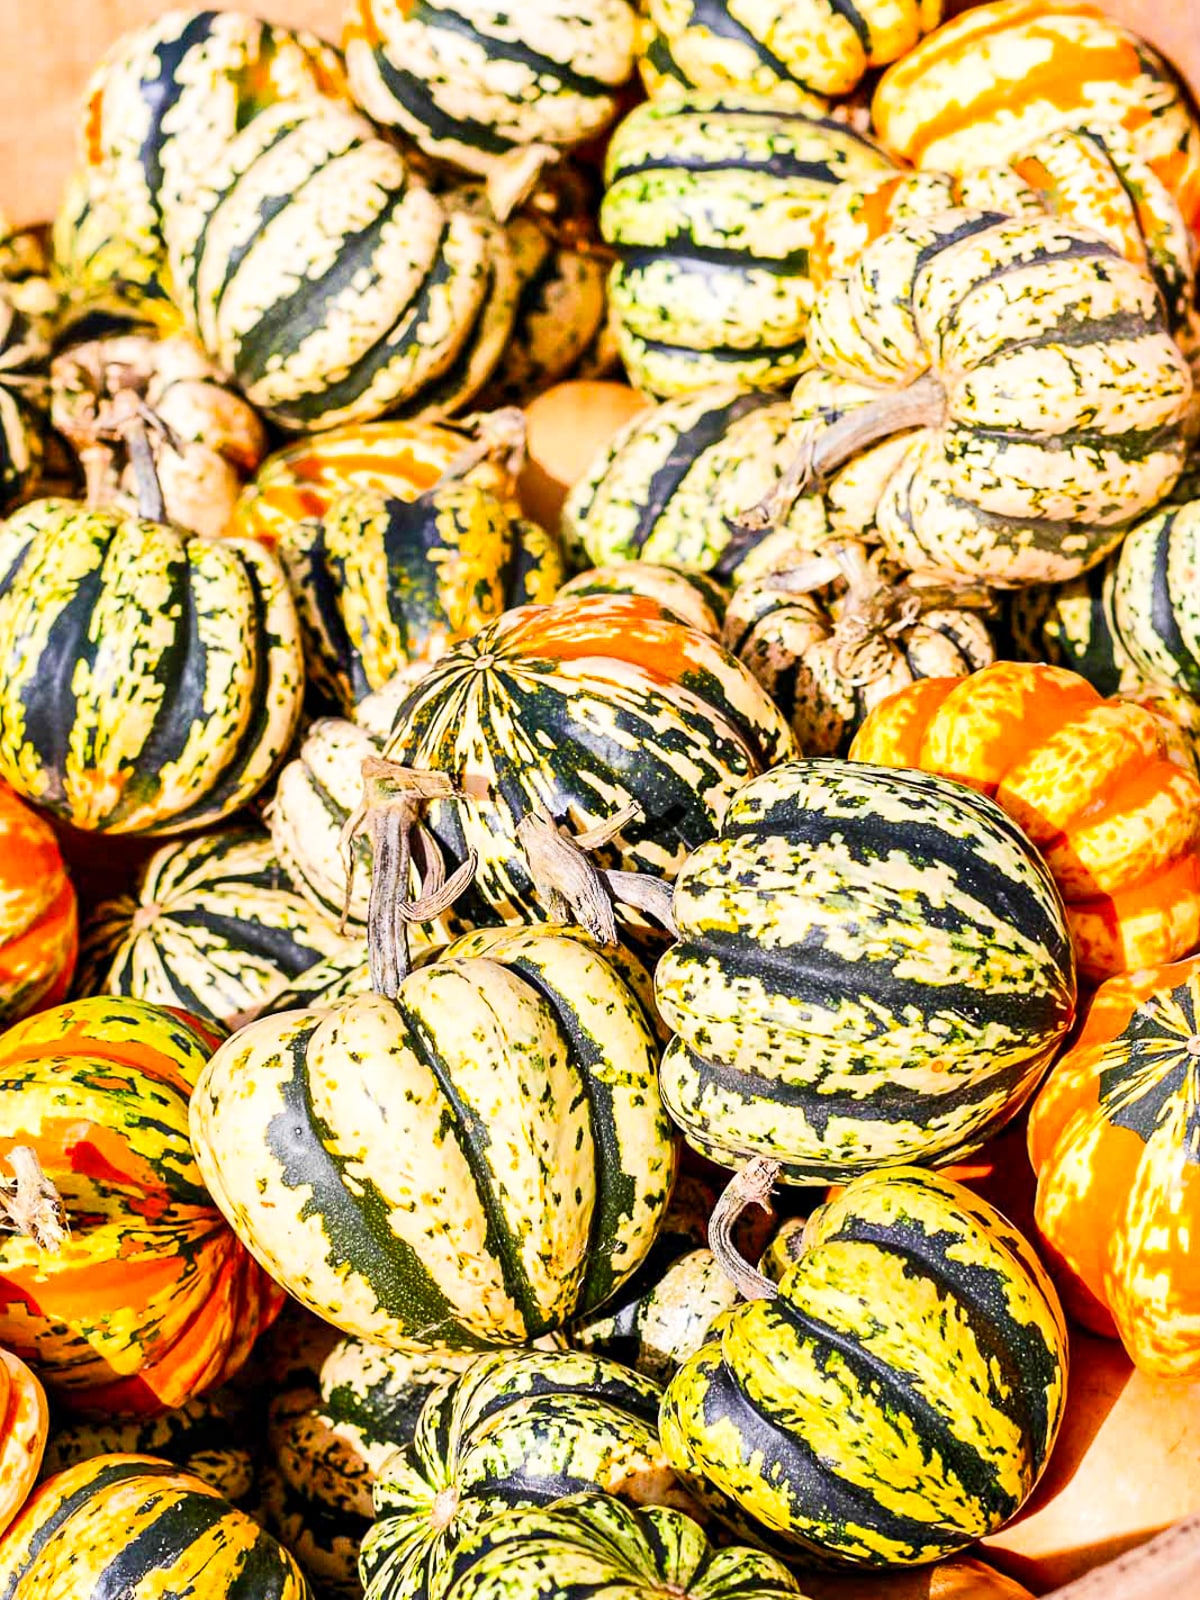 A pile of Fall squash and pumpkins in orange, green and white colors.